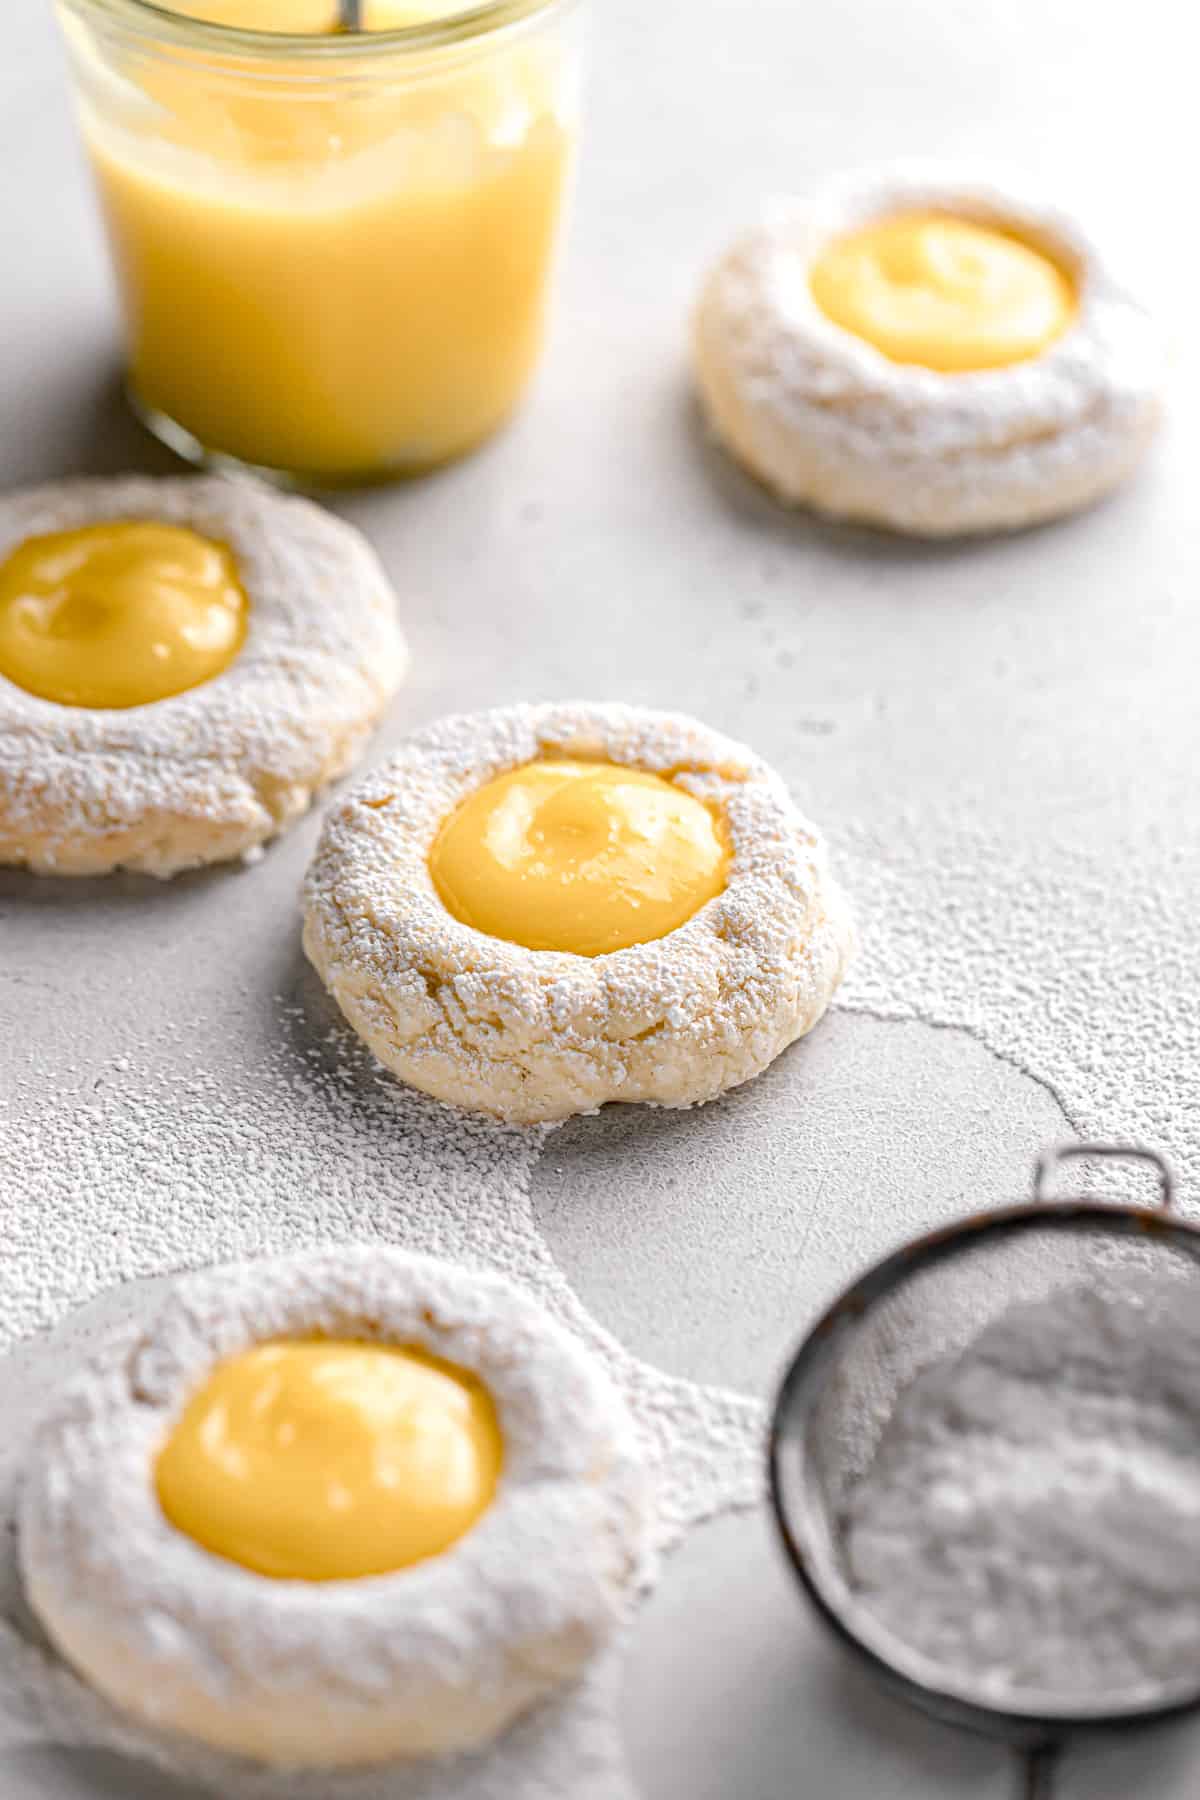 cream cheese cookies dusted with powdered sugar and filled with tart lemon curd.